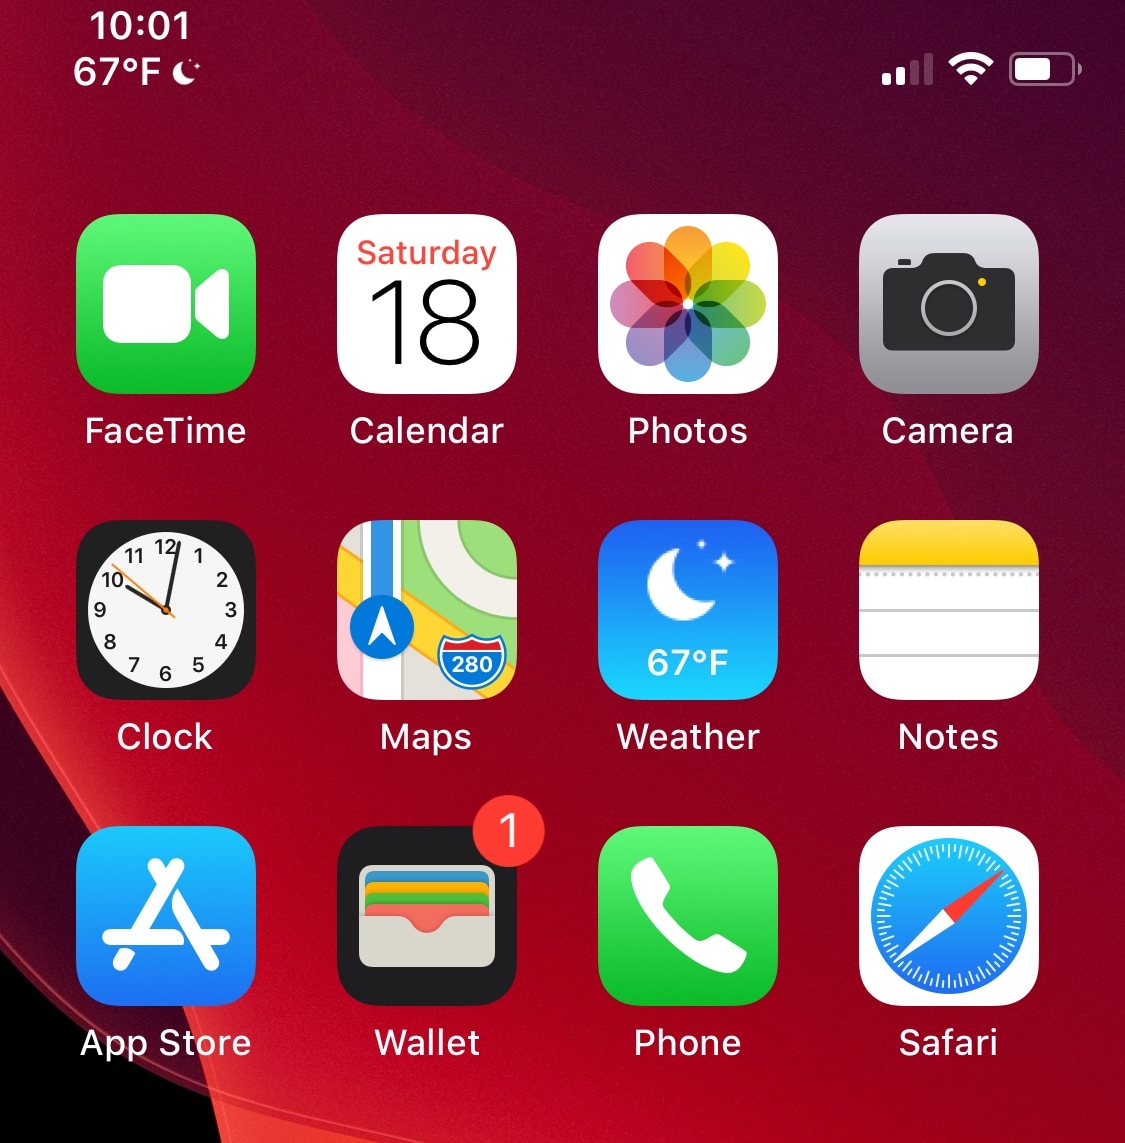 Meteorite gets iOS 13 support, adds live weather to the Status Bar